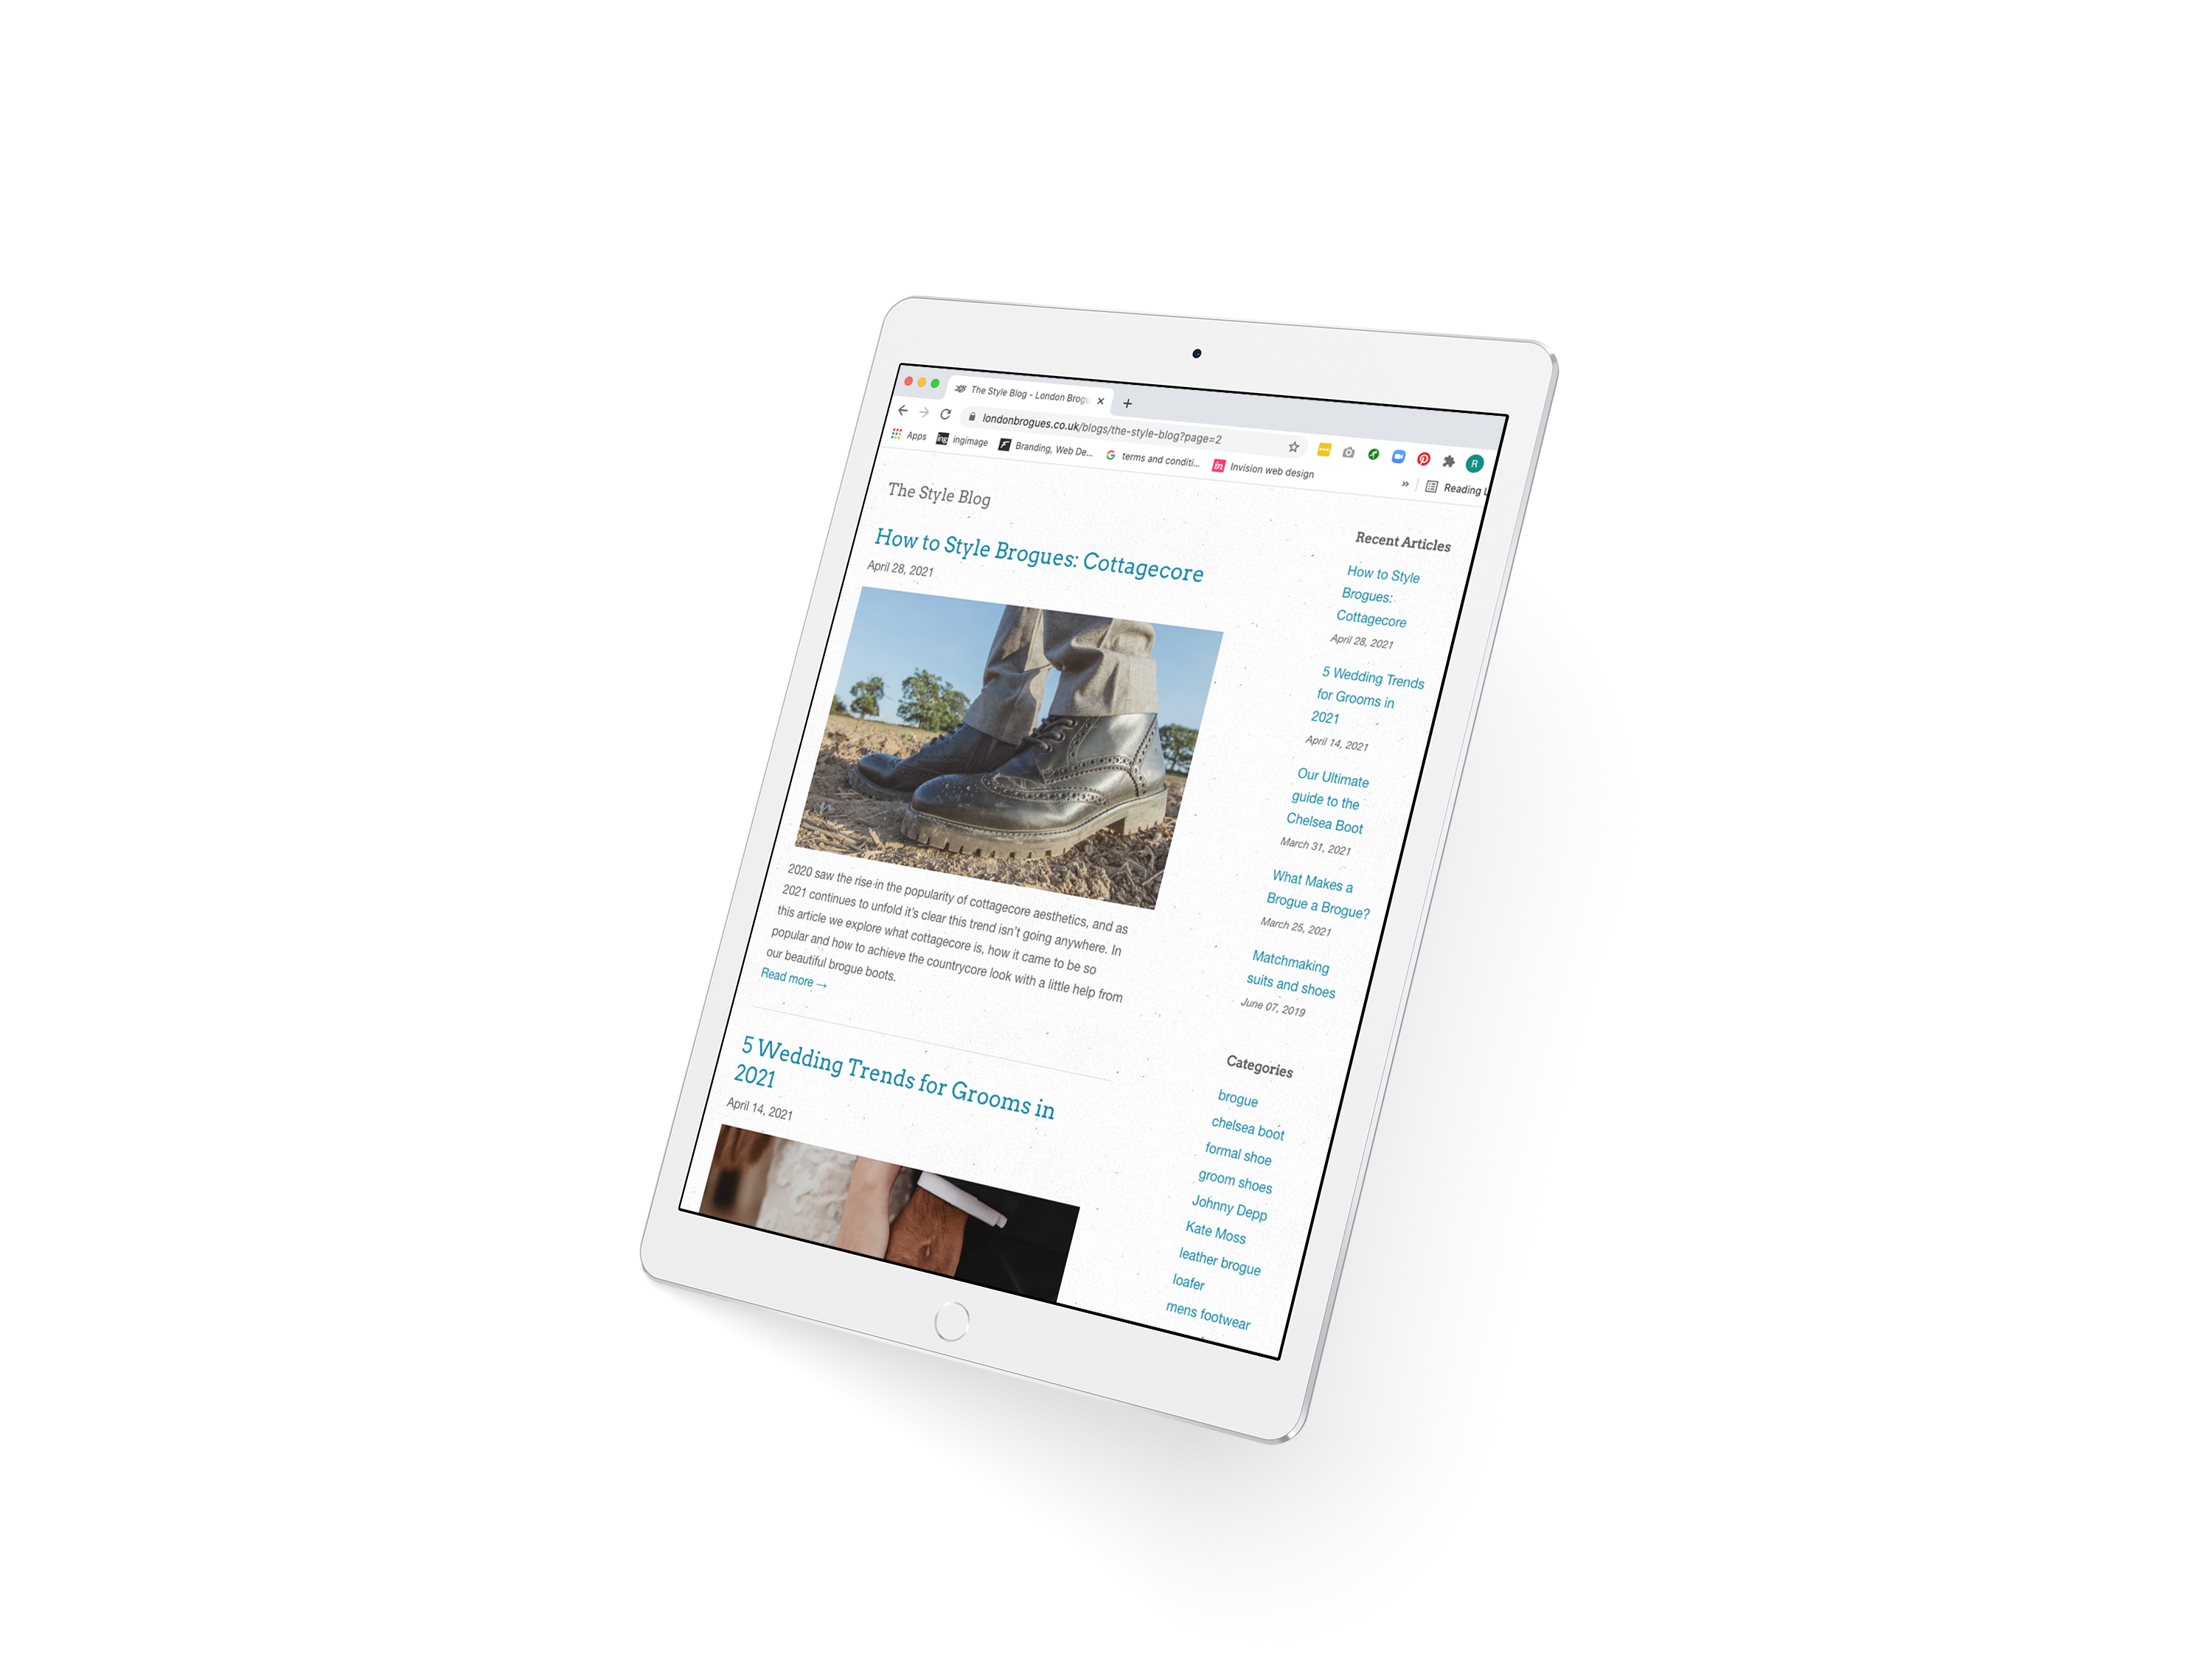 A white IPad with a blog landing page for London brogues visible